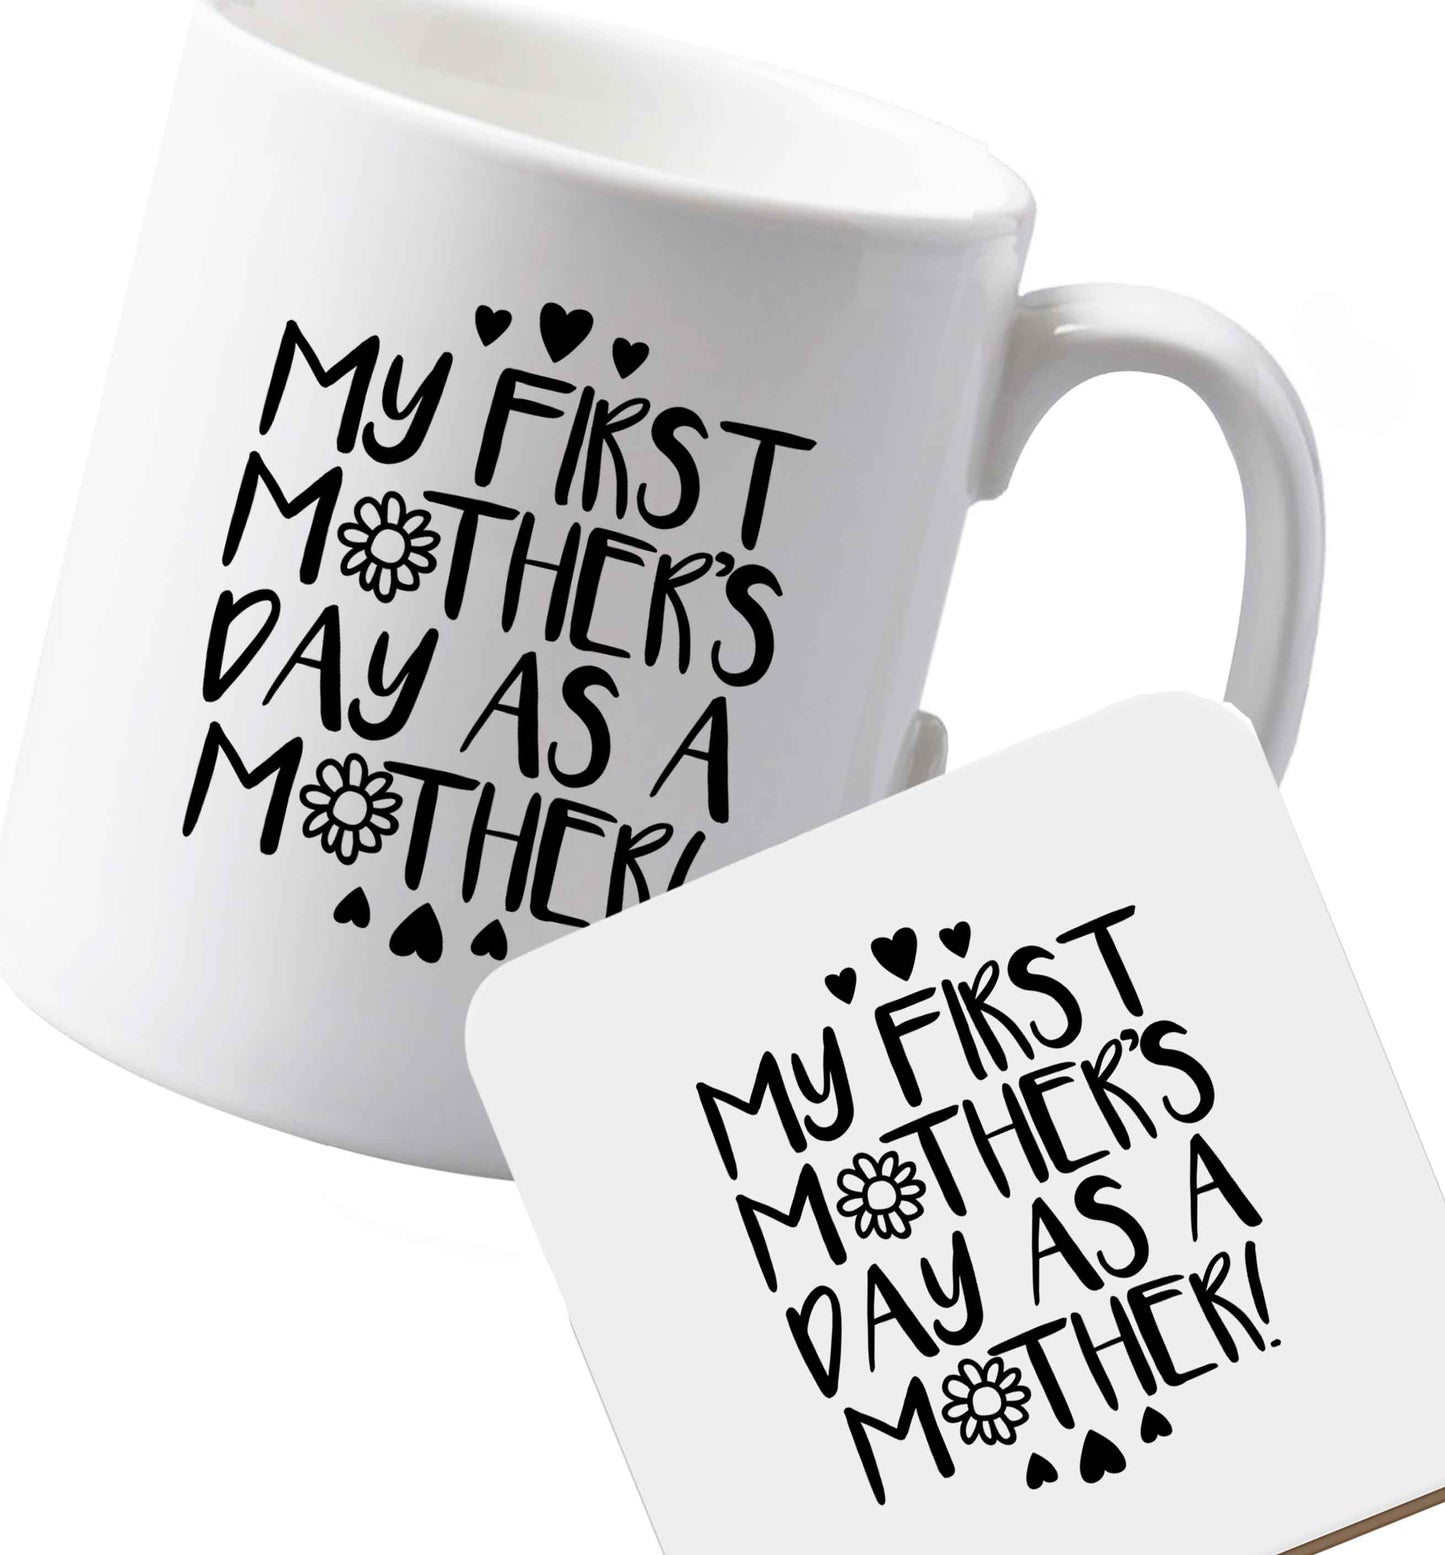 10 oz Ceramic mug and coaster It's my first mother's day as a mother both sides